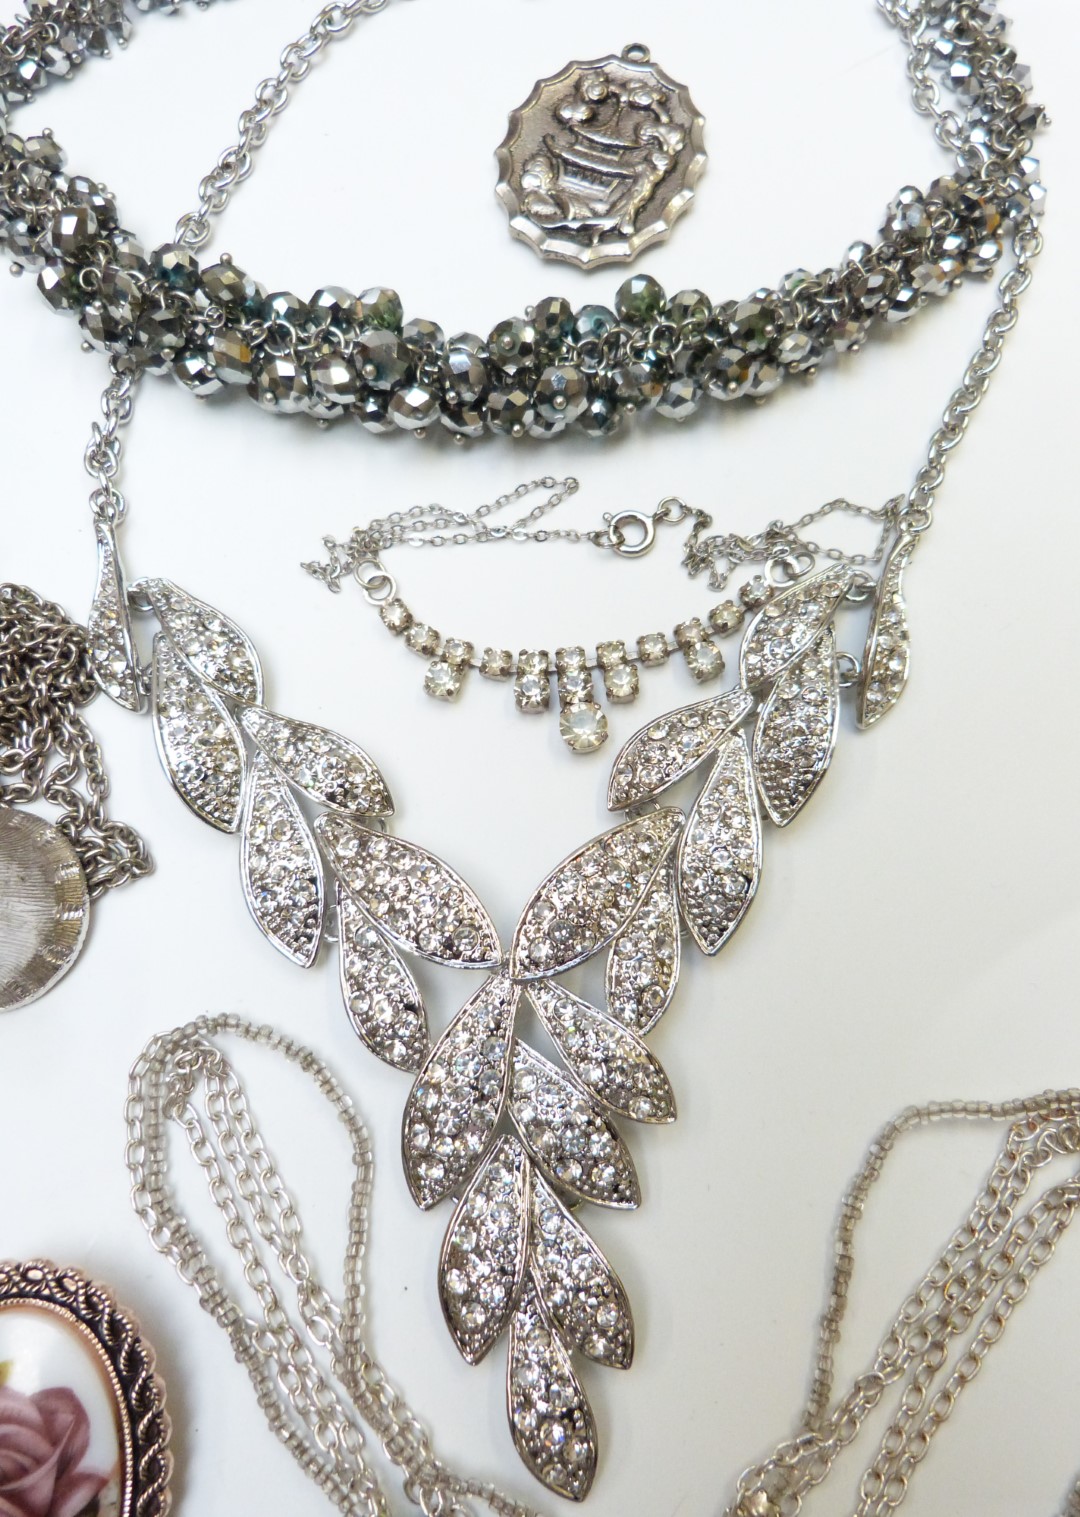 A collection of jewellery including glass beaded necklaces, sodalite necklace, faux pearls, amethyst - Image 6 of 11